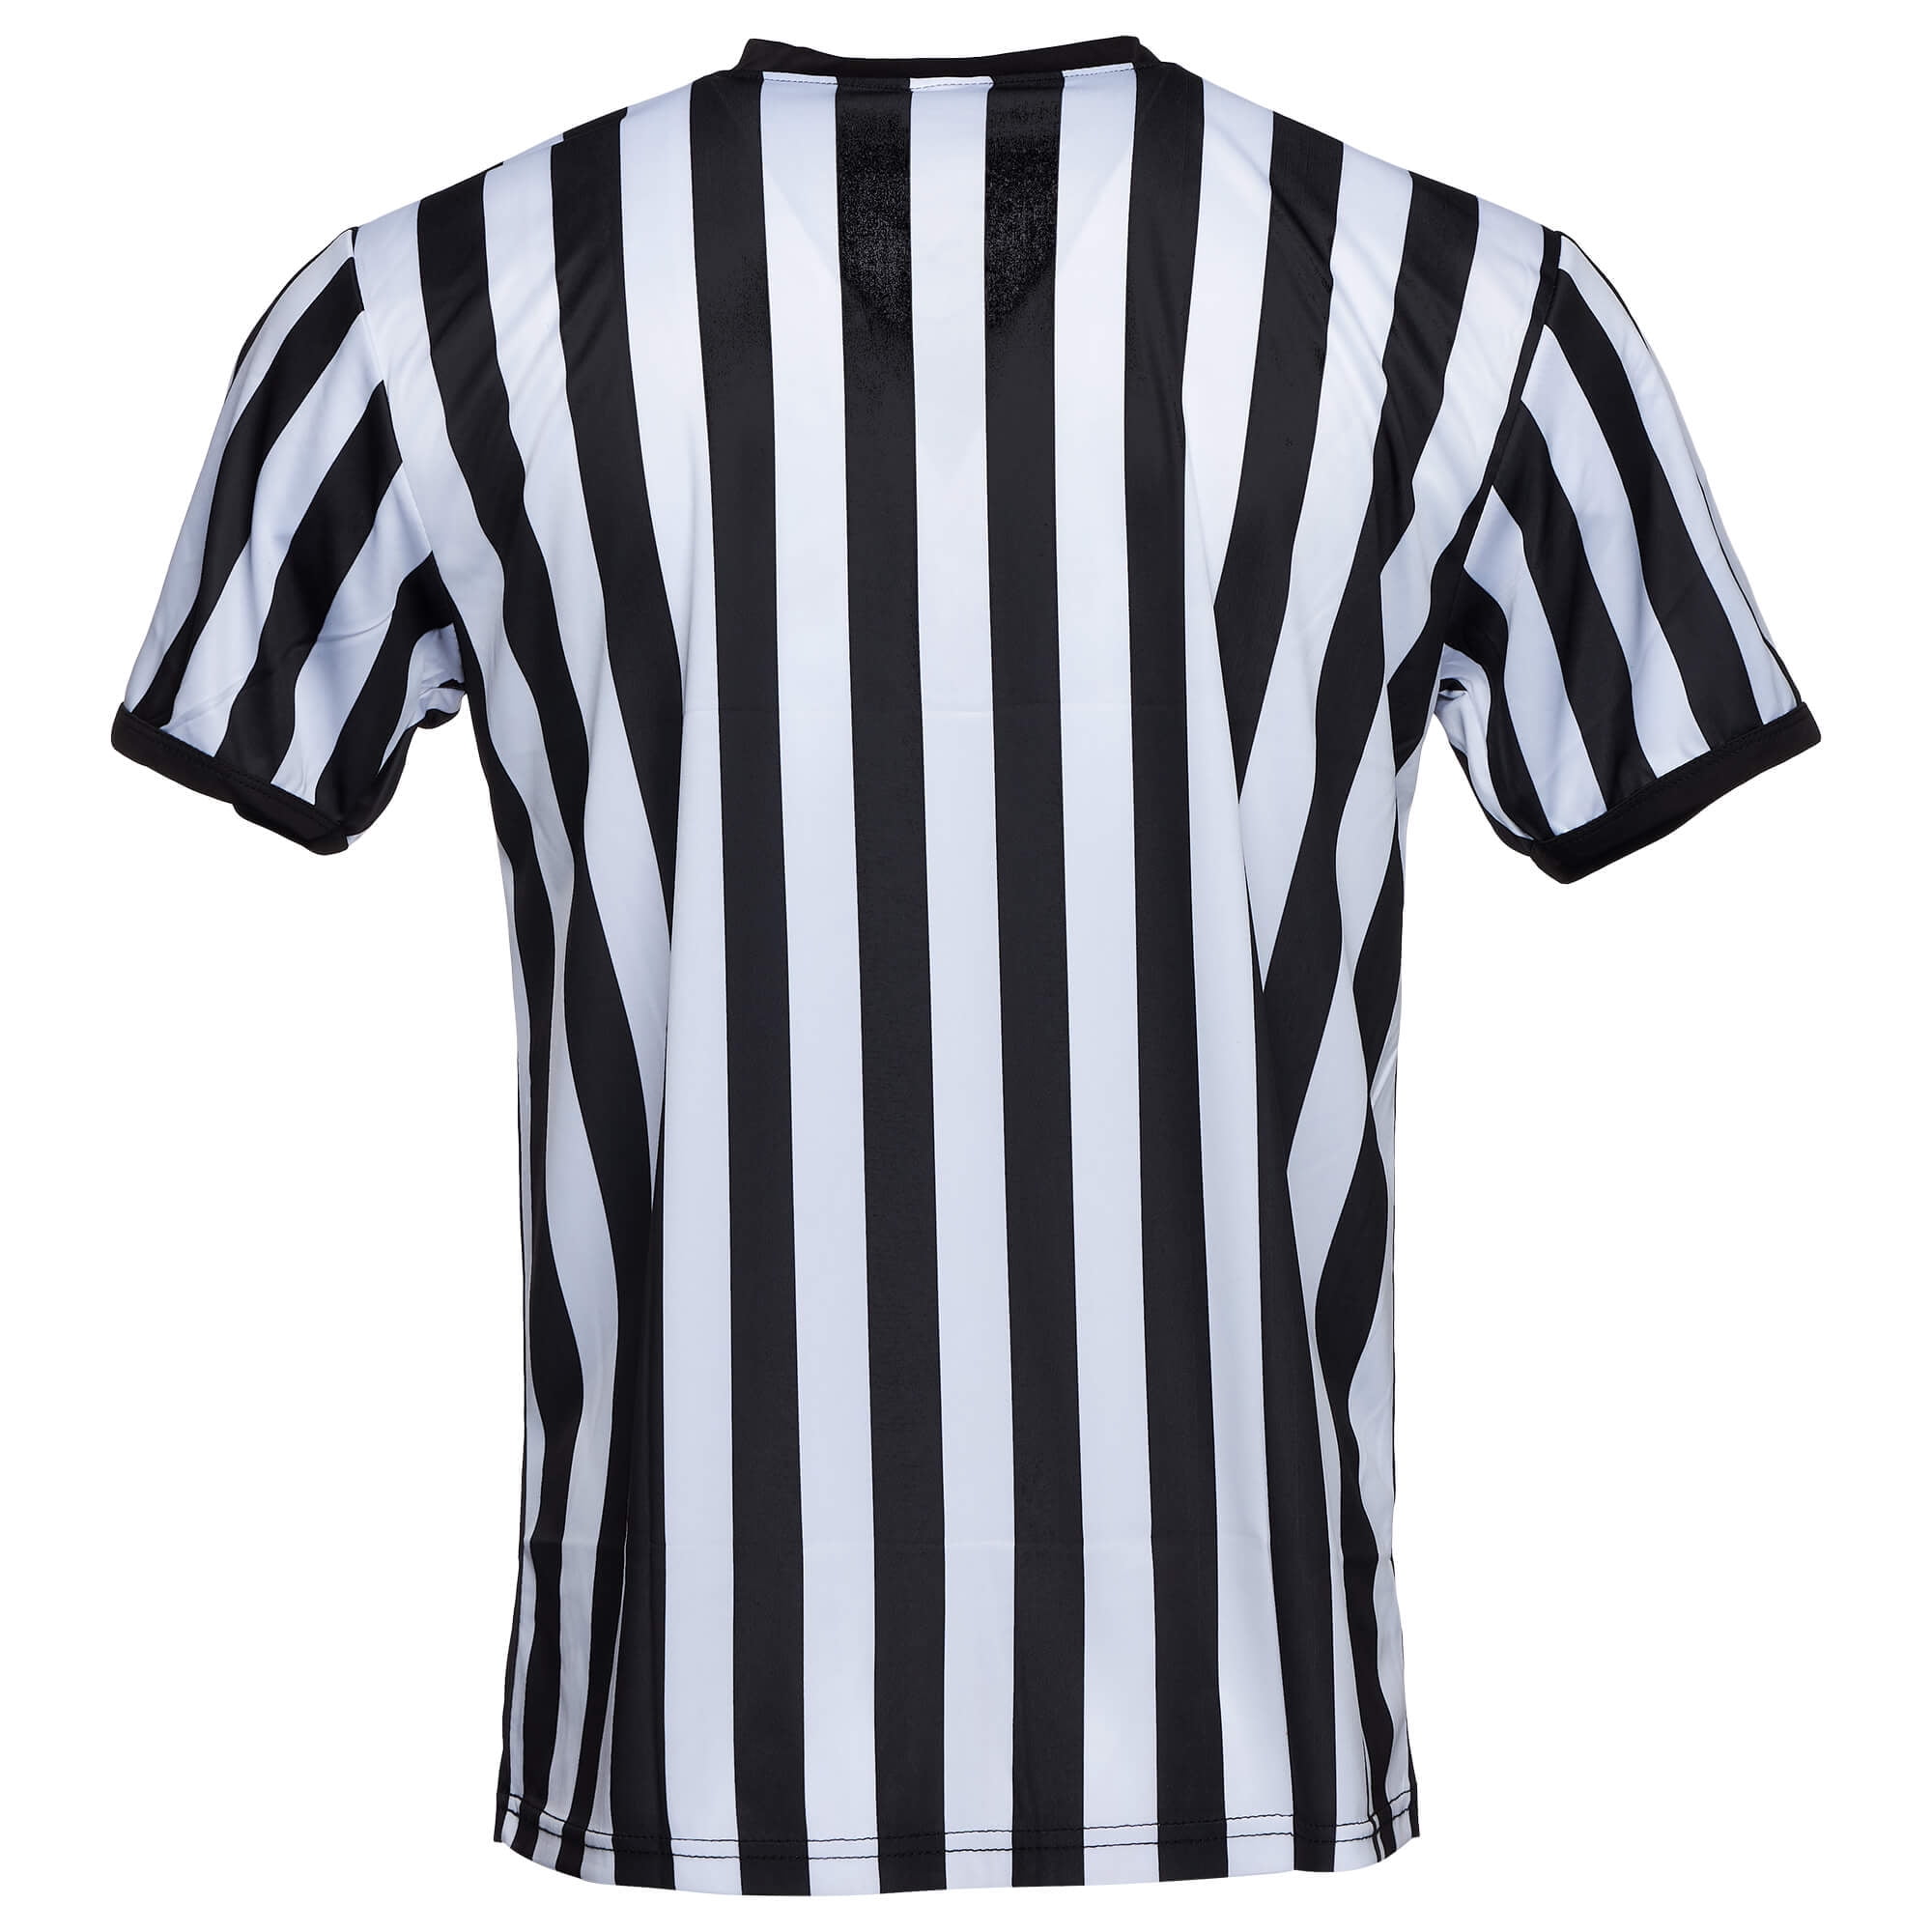 Crown Sporting Goods Mens Official Striped Referee/Umpire V-Neck Jersey 